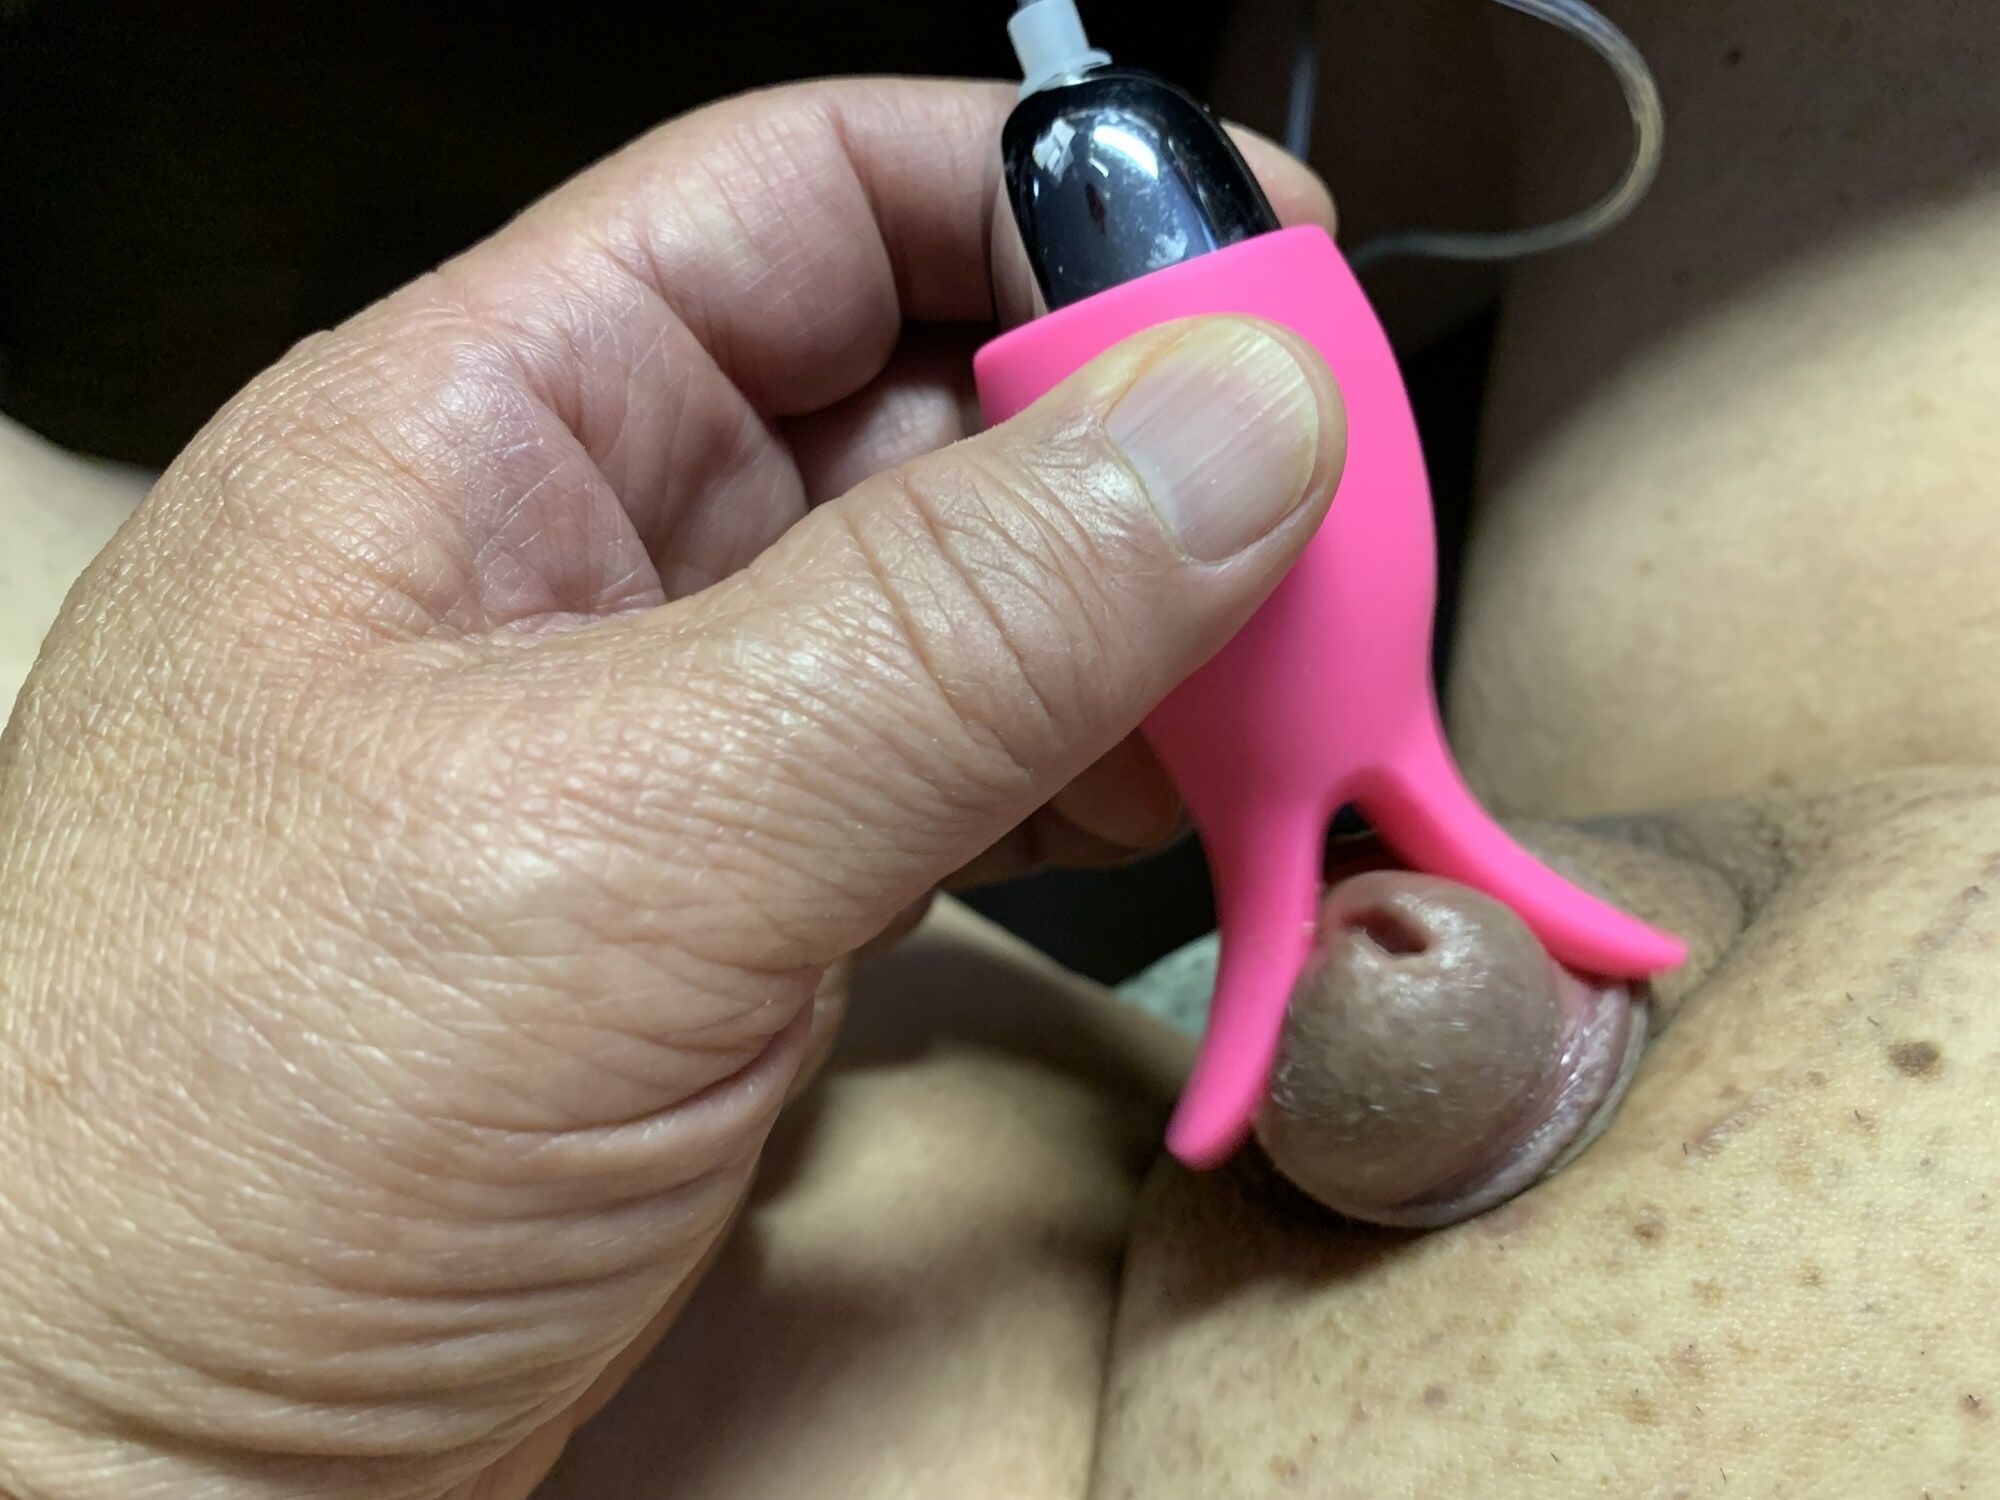 Edging small penis with clit vibrator #10